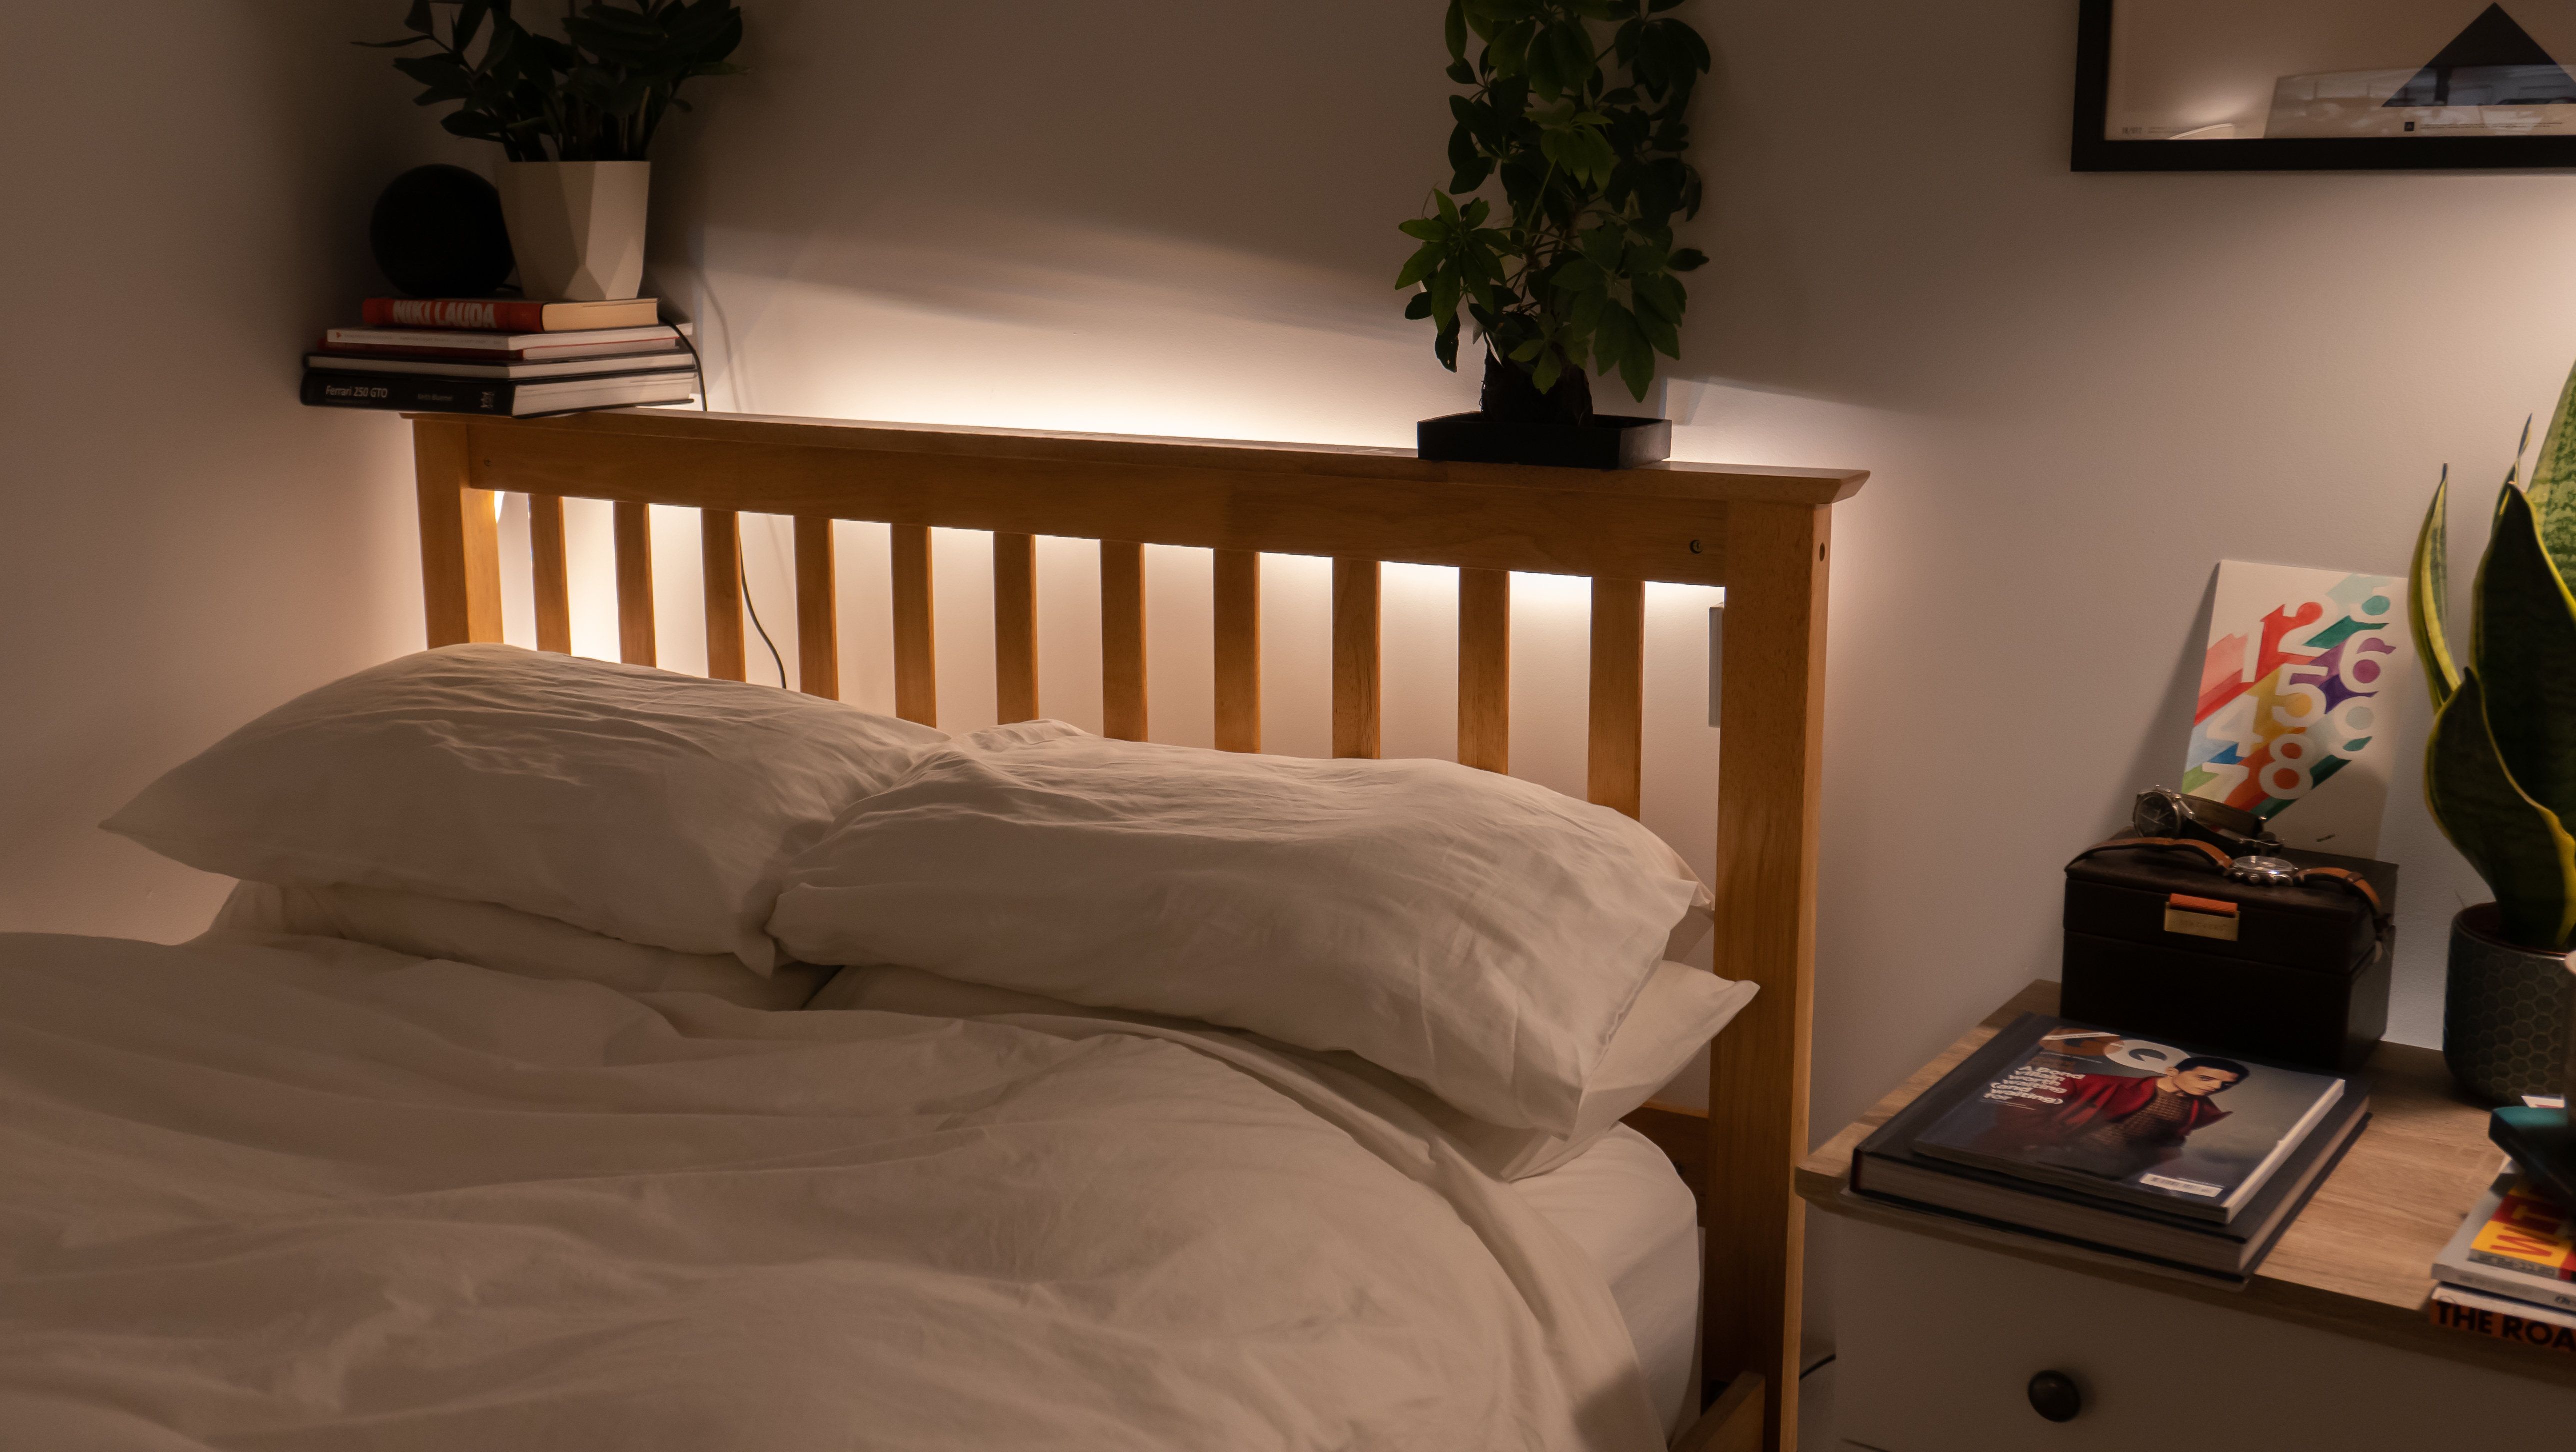 How to fit Hue smart lighting to your bed headboard - Gearbrain